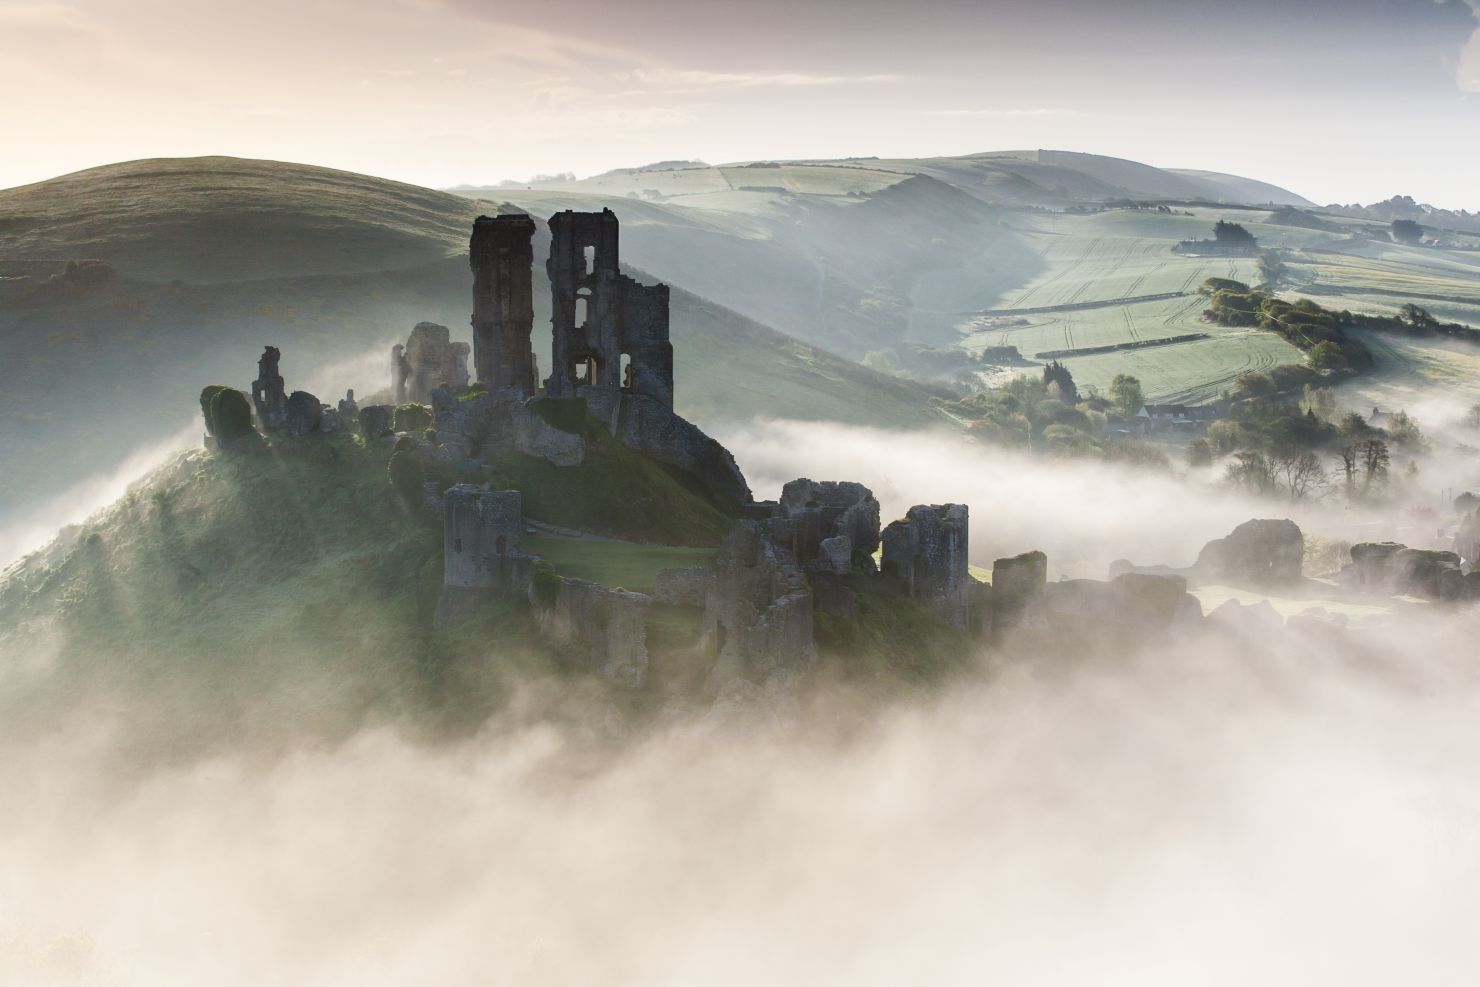 Ruins of Corfe Castle rising from above the fog